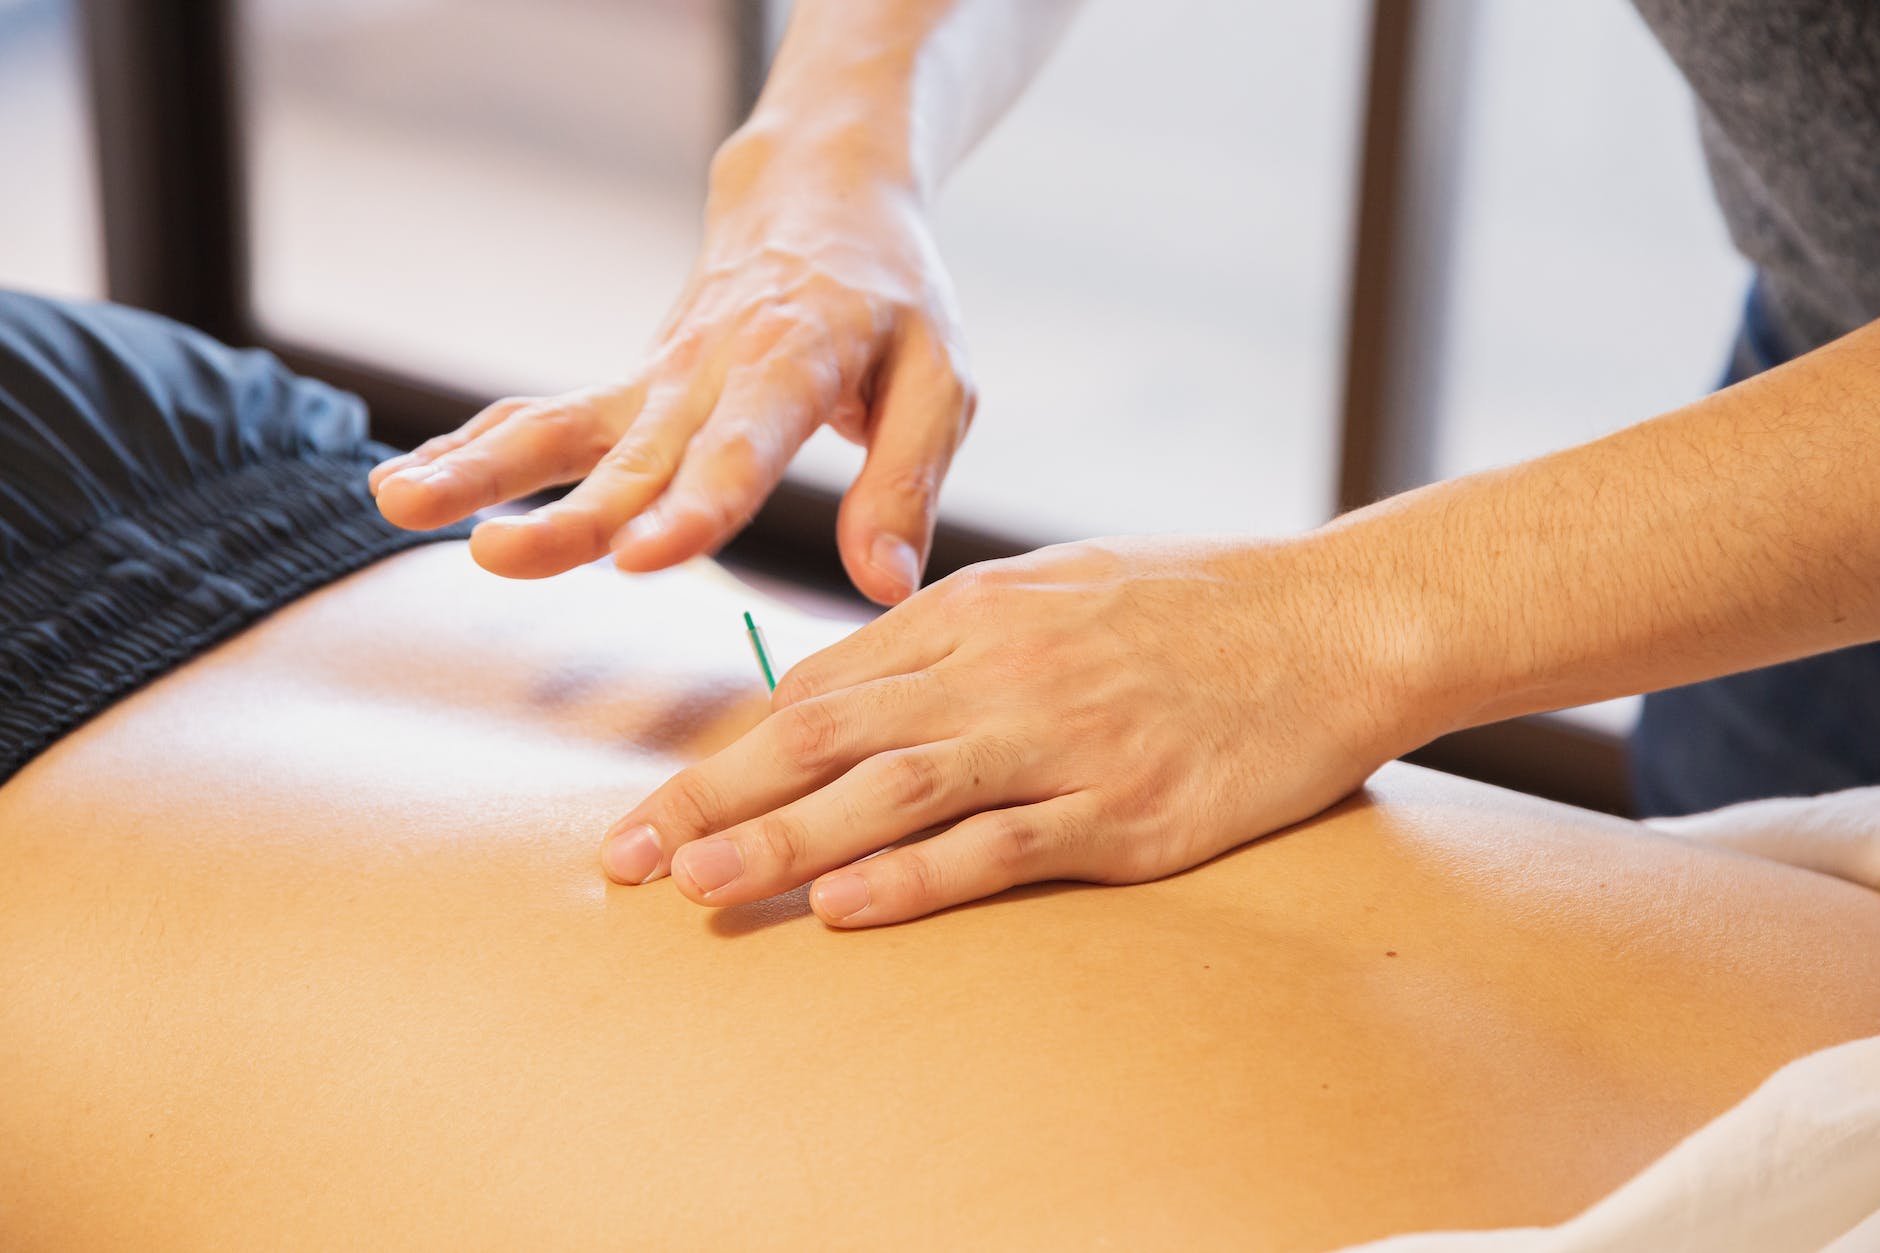 therapist inserting an acupuncture needle into a patients abdomen during a treatment.